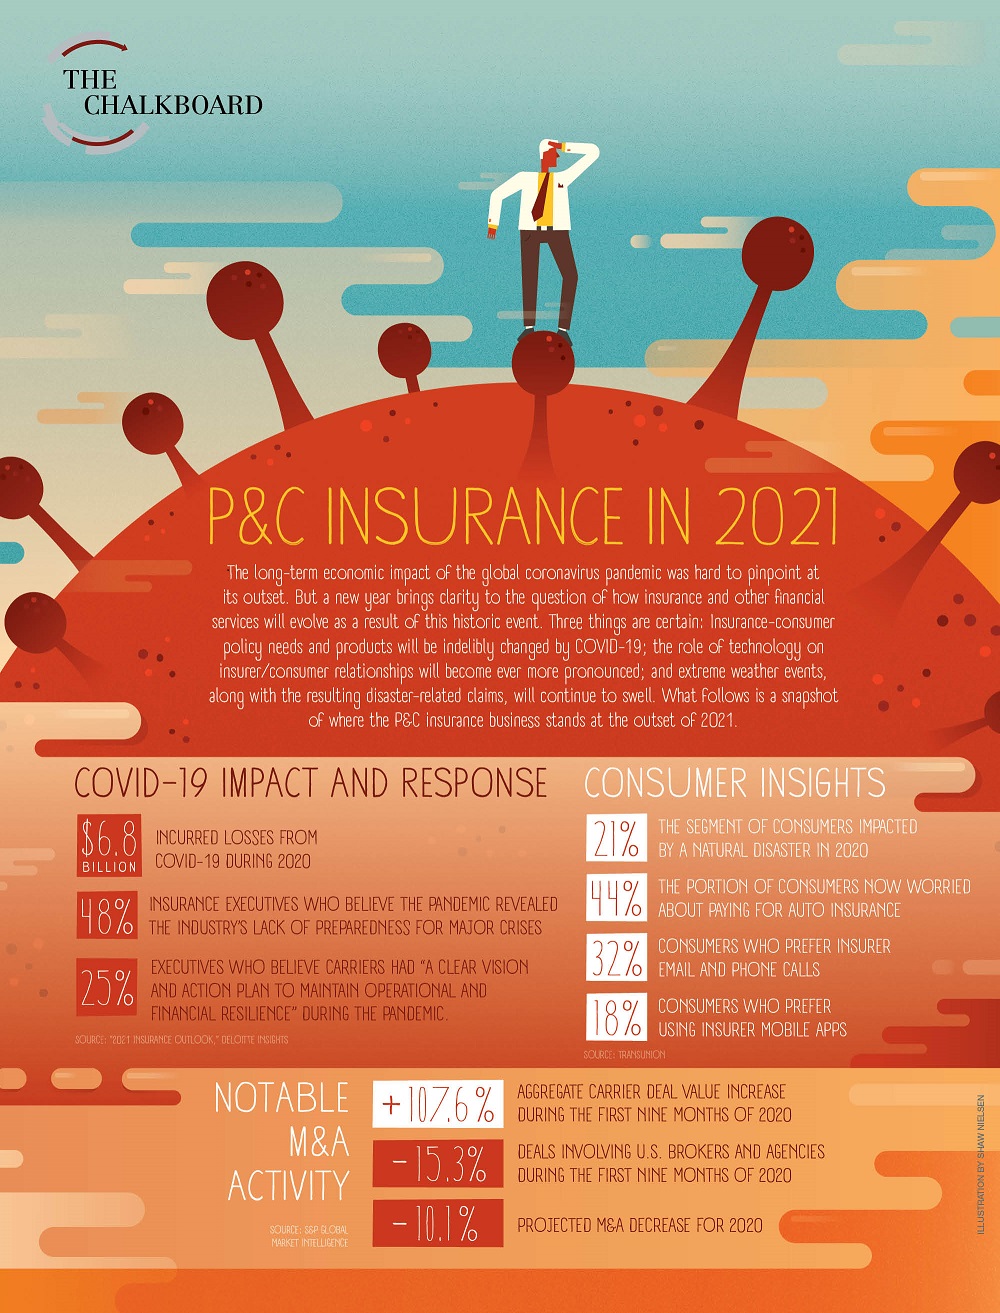 These stats define P&C insurance in 2021 PropertyCasualty360